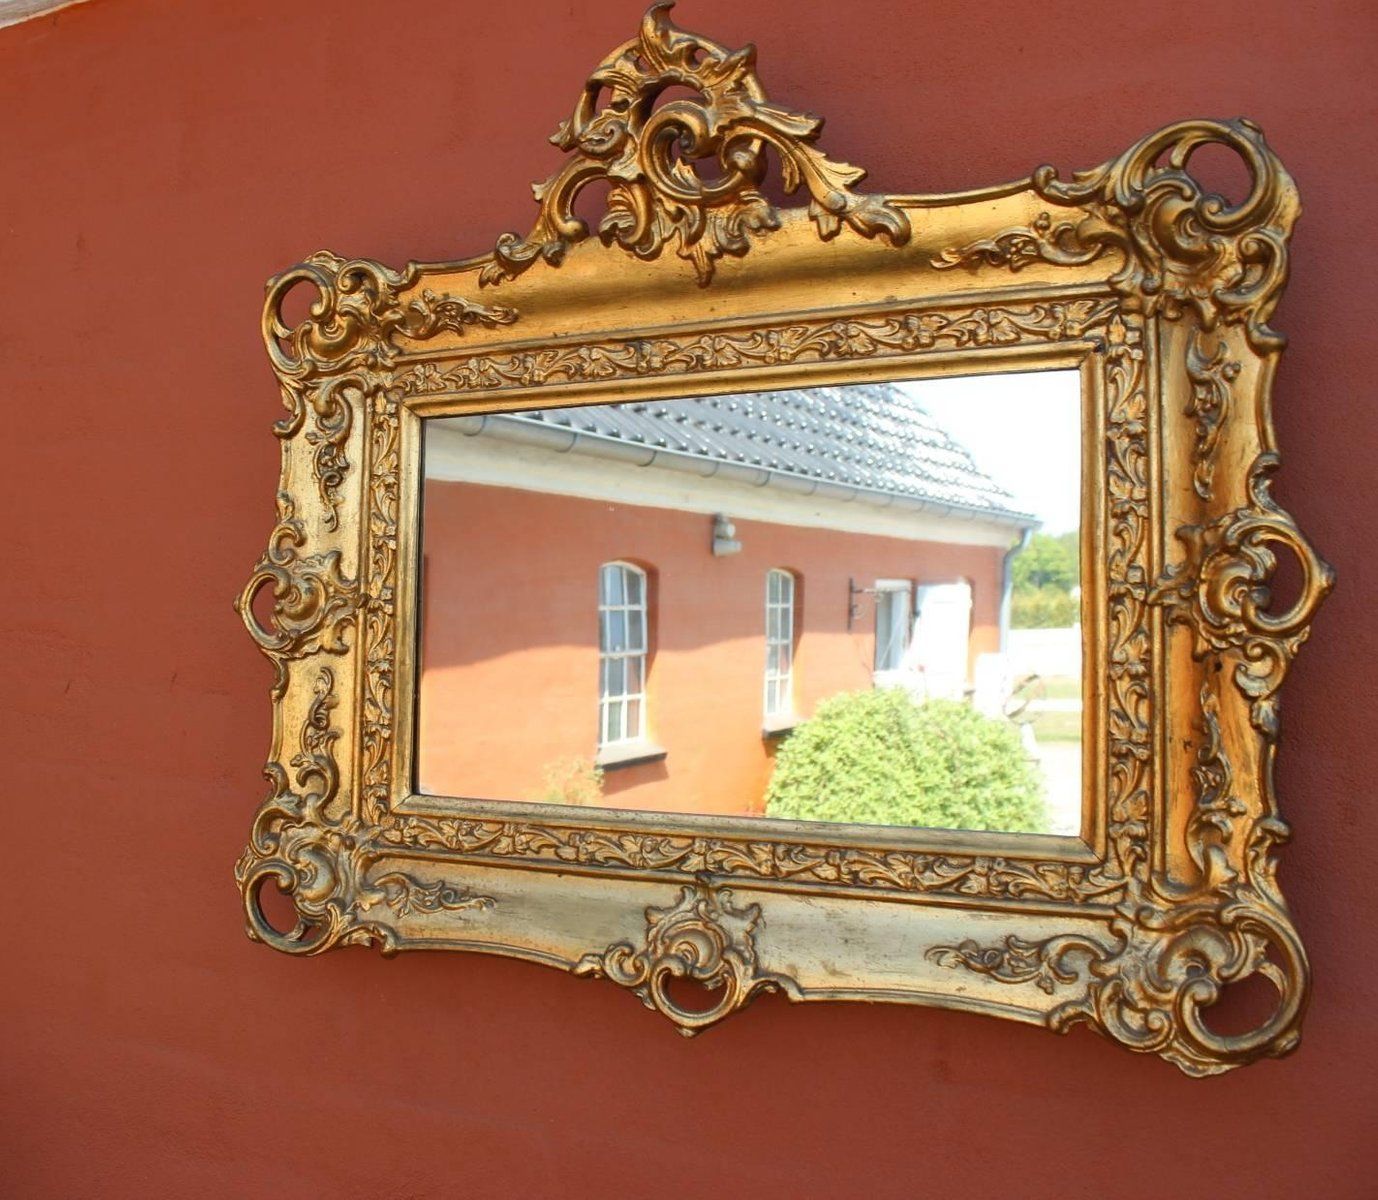 Antique Gold Leaf Frame Mirror, 1820s For Sale At Pamono Inside Gold Leaf Metal Wall Mirrors (View 13 of 15)